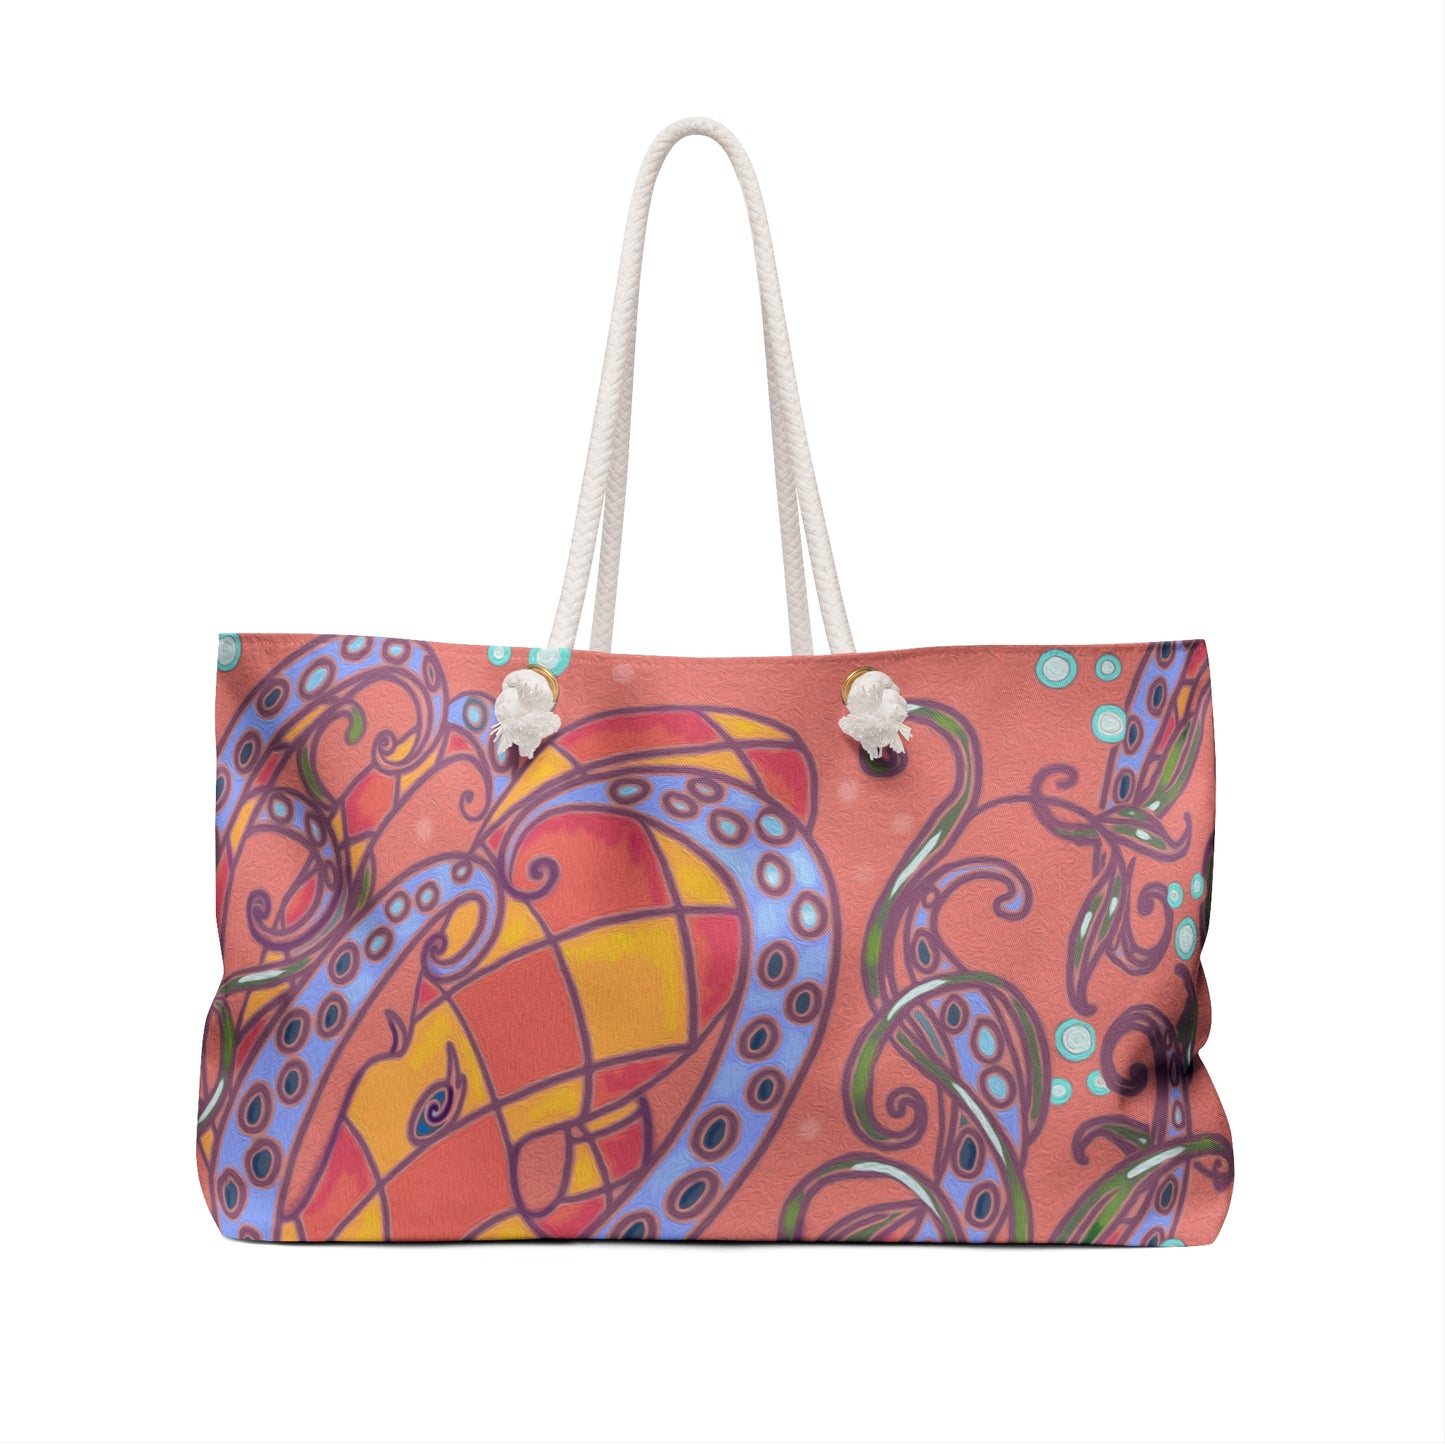 Coral Octopus Weekender Bag from Talula Land